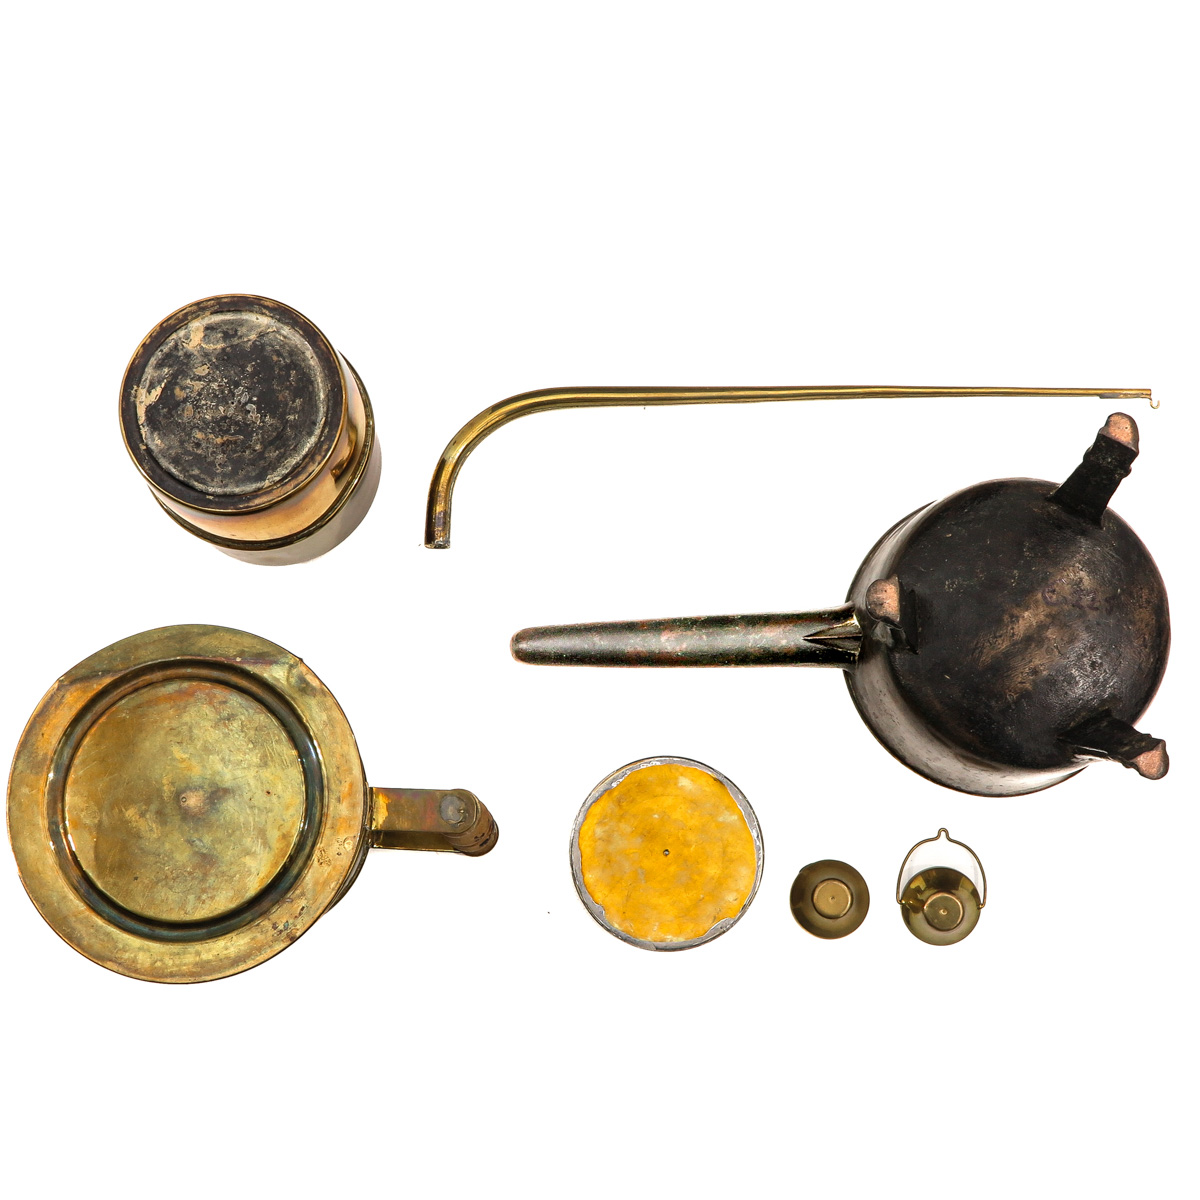 A Children's Toy Stove with Accessories - Image 6 of 9